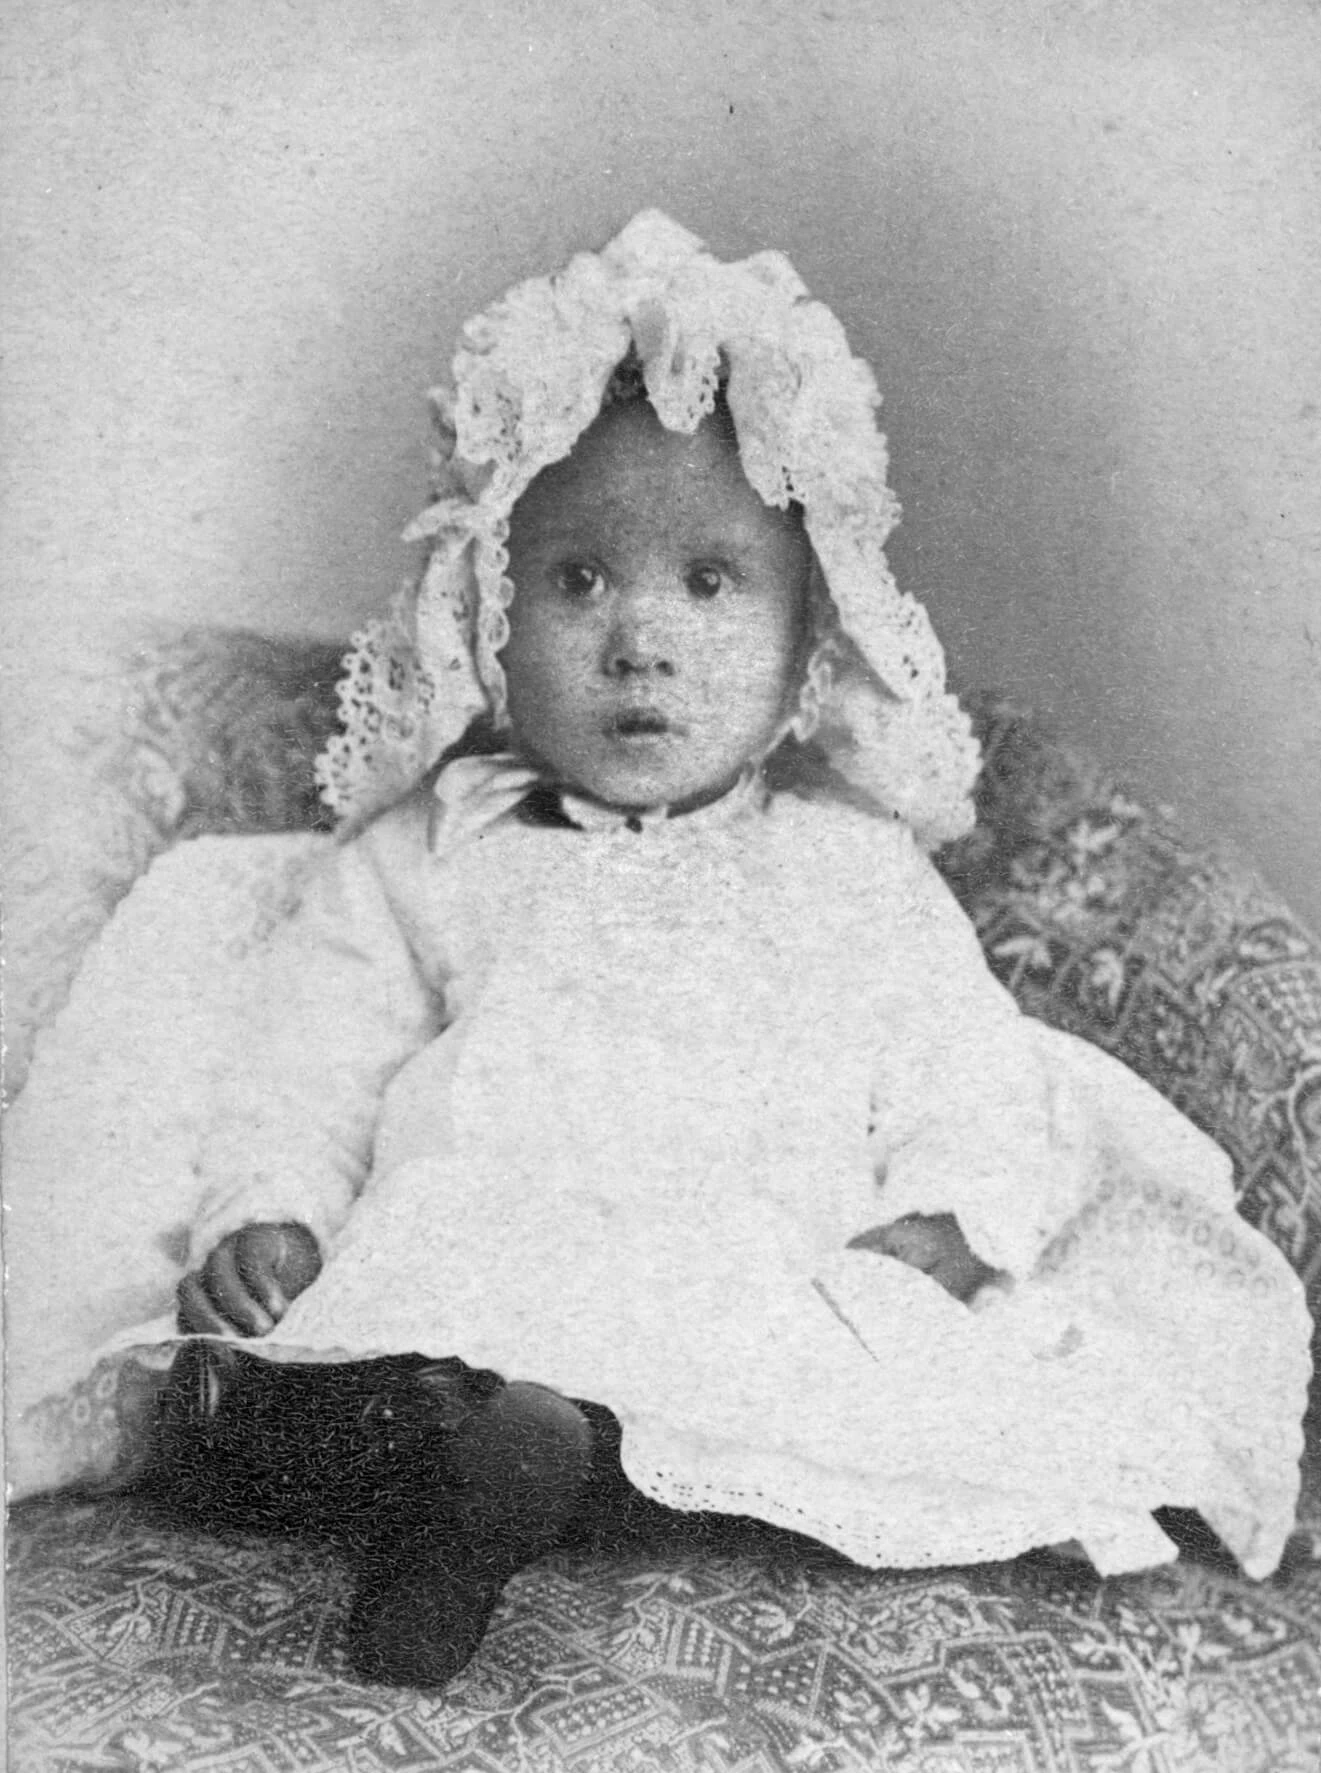 Black and white photo of an infant wearing a white frilly cap and long white dress.